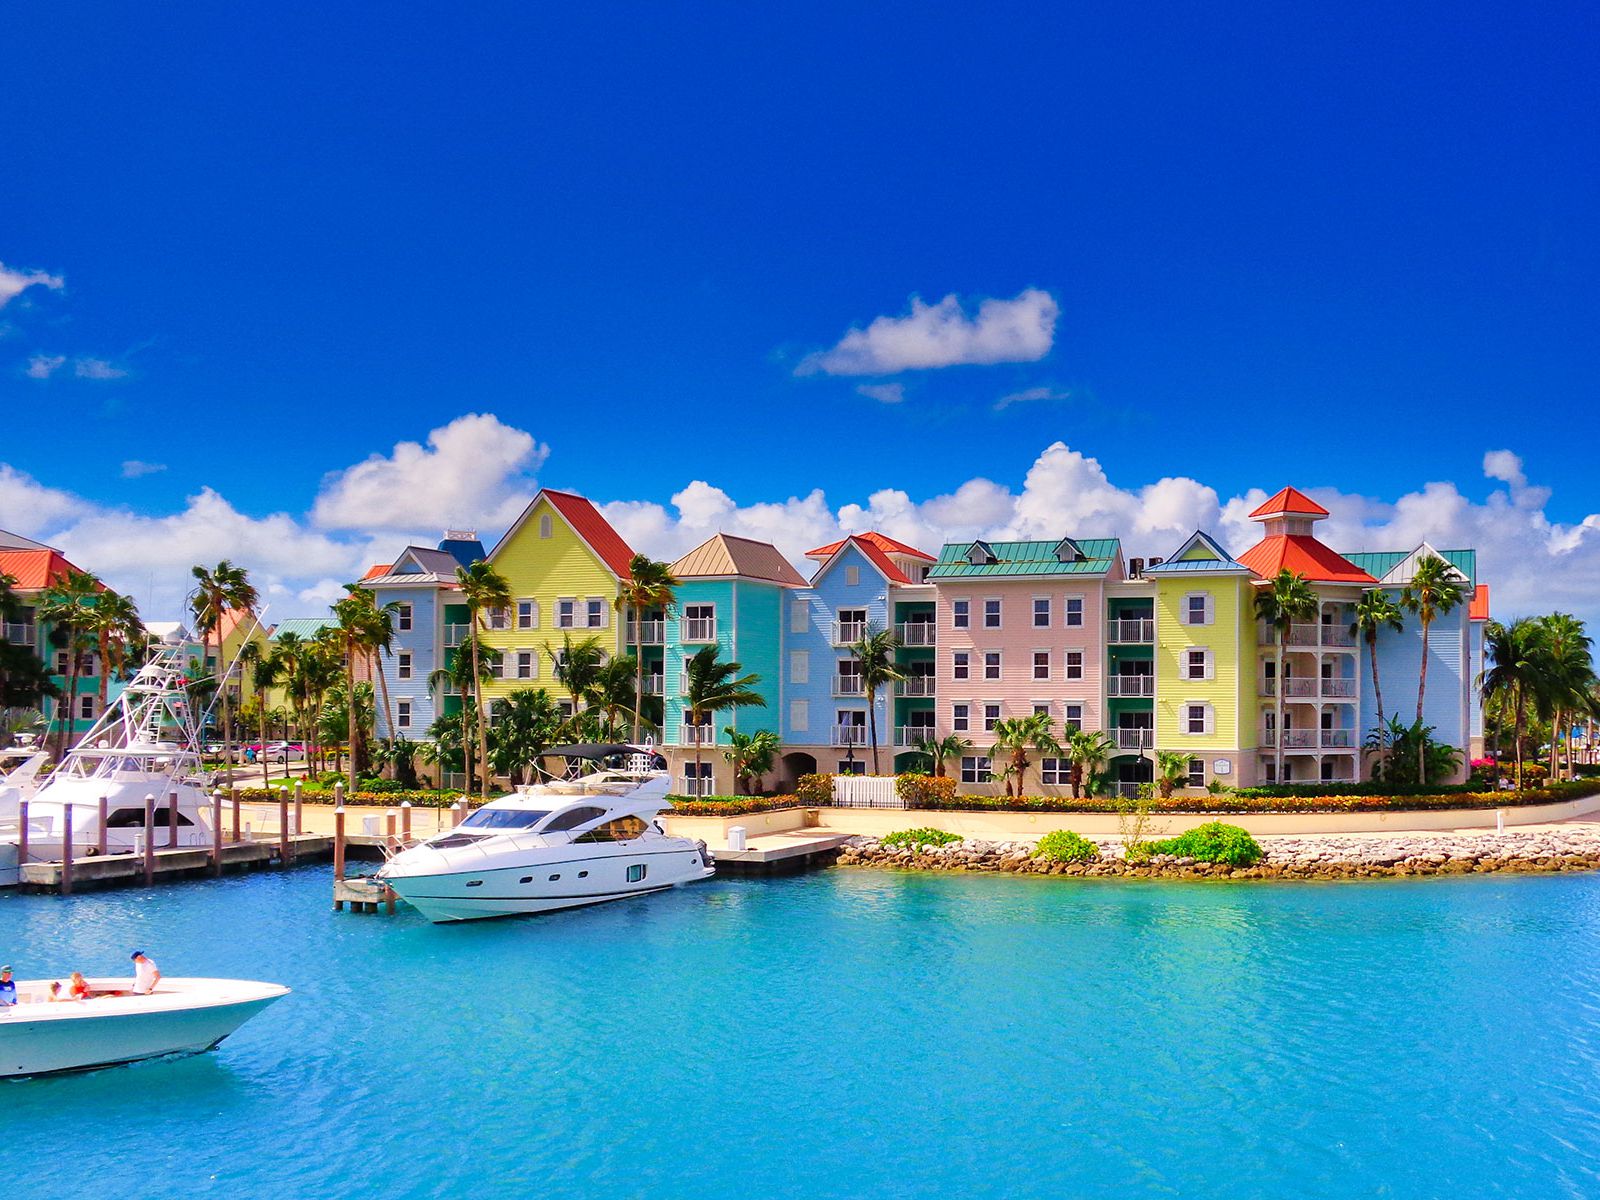 How Much Does A Trip To The Bahamas Cost?